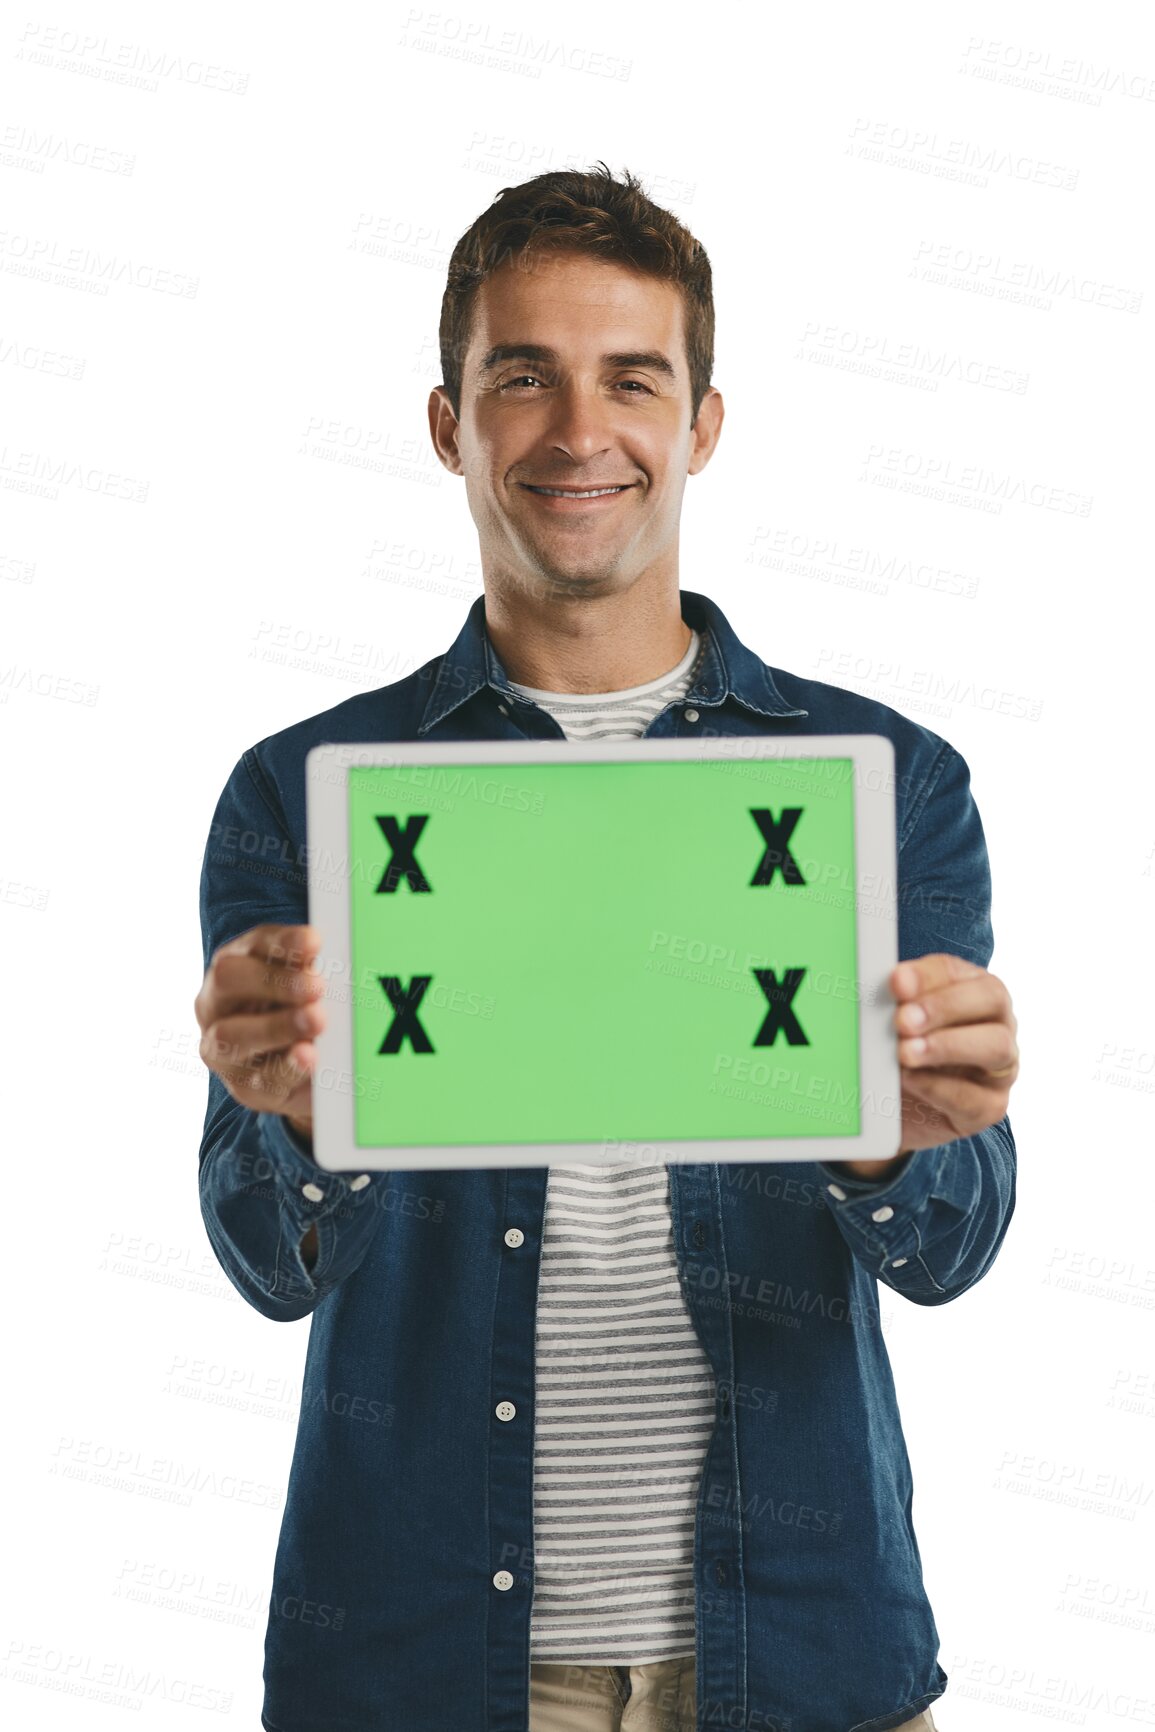 Buy stock photo Portrait, green screen and man show tablet, smile and isolated on a transparent png background. Digital technology, chroma key and person marketing, social media or mockup space with tracking markers